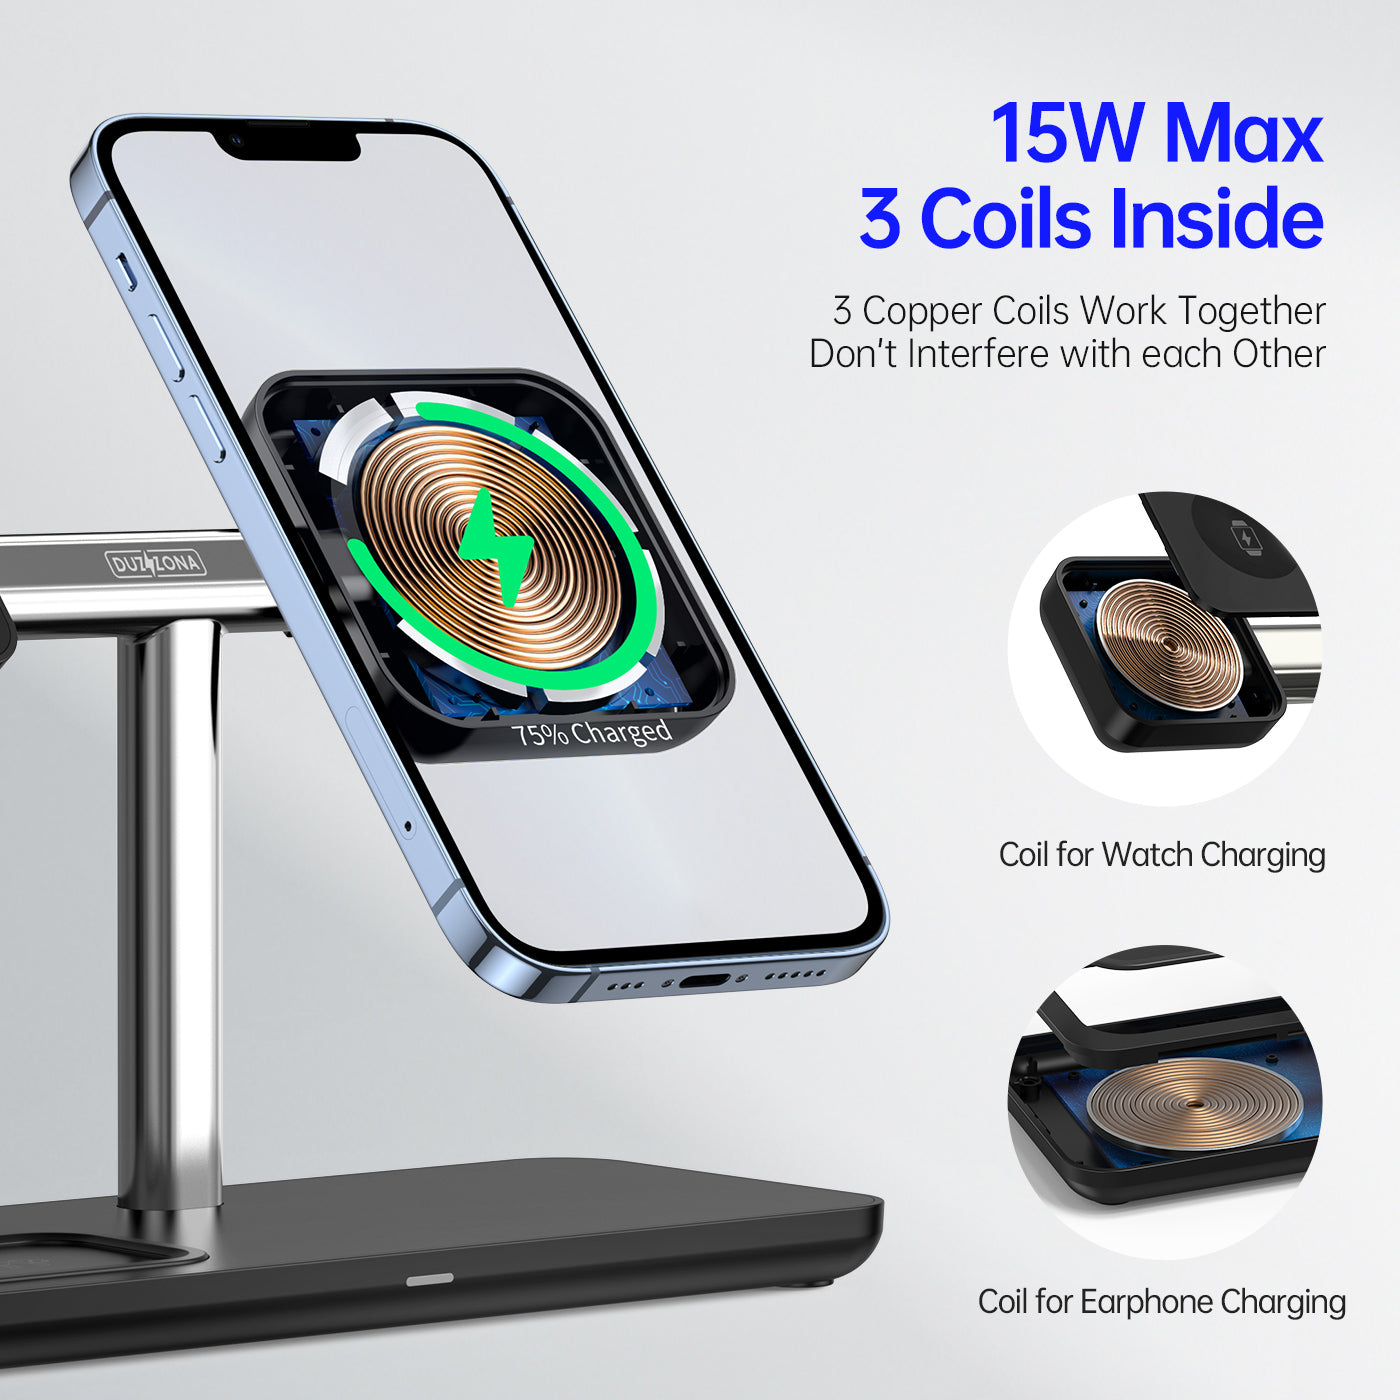 Wireless Charging Dock for iPhone + Apple Watch + AirPods